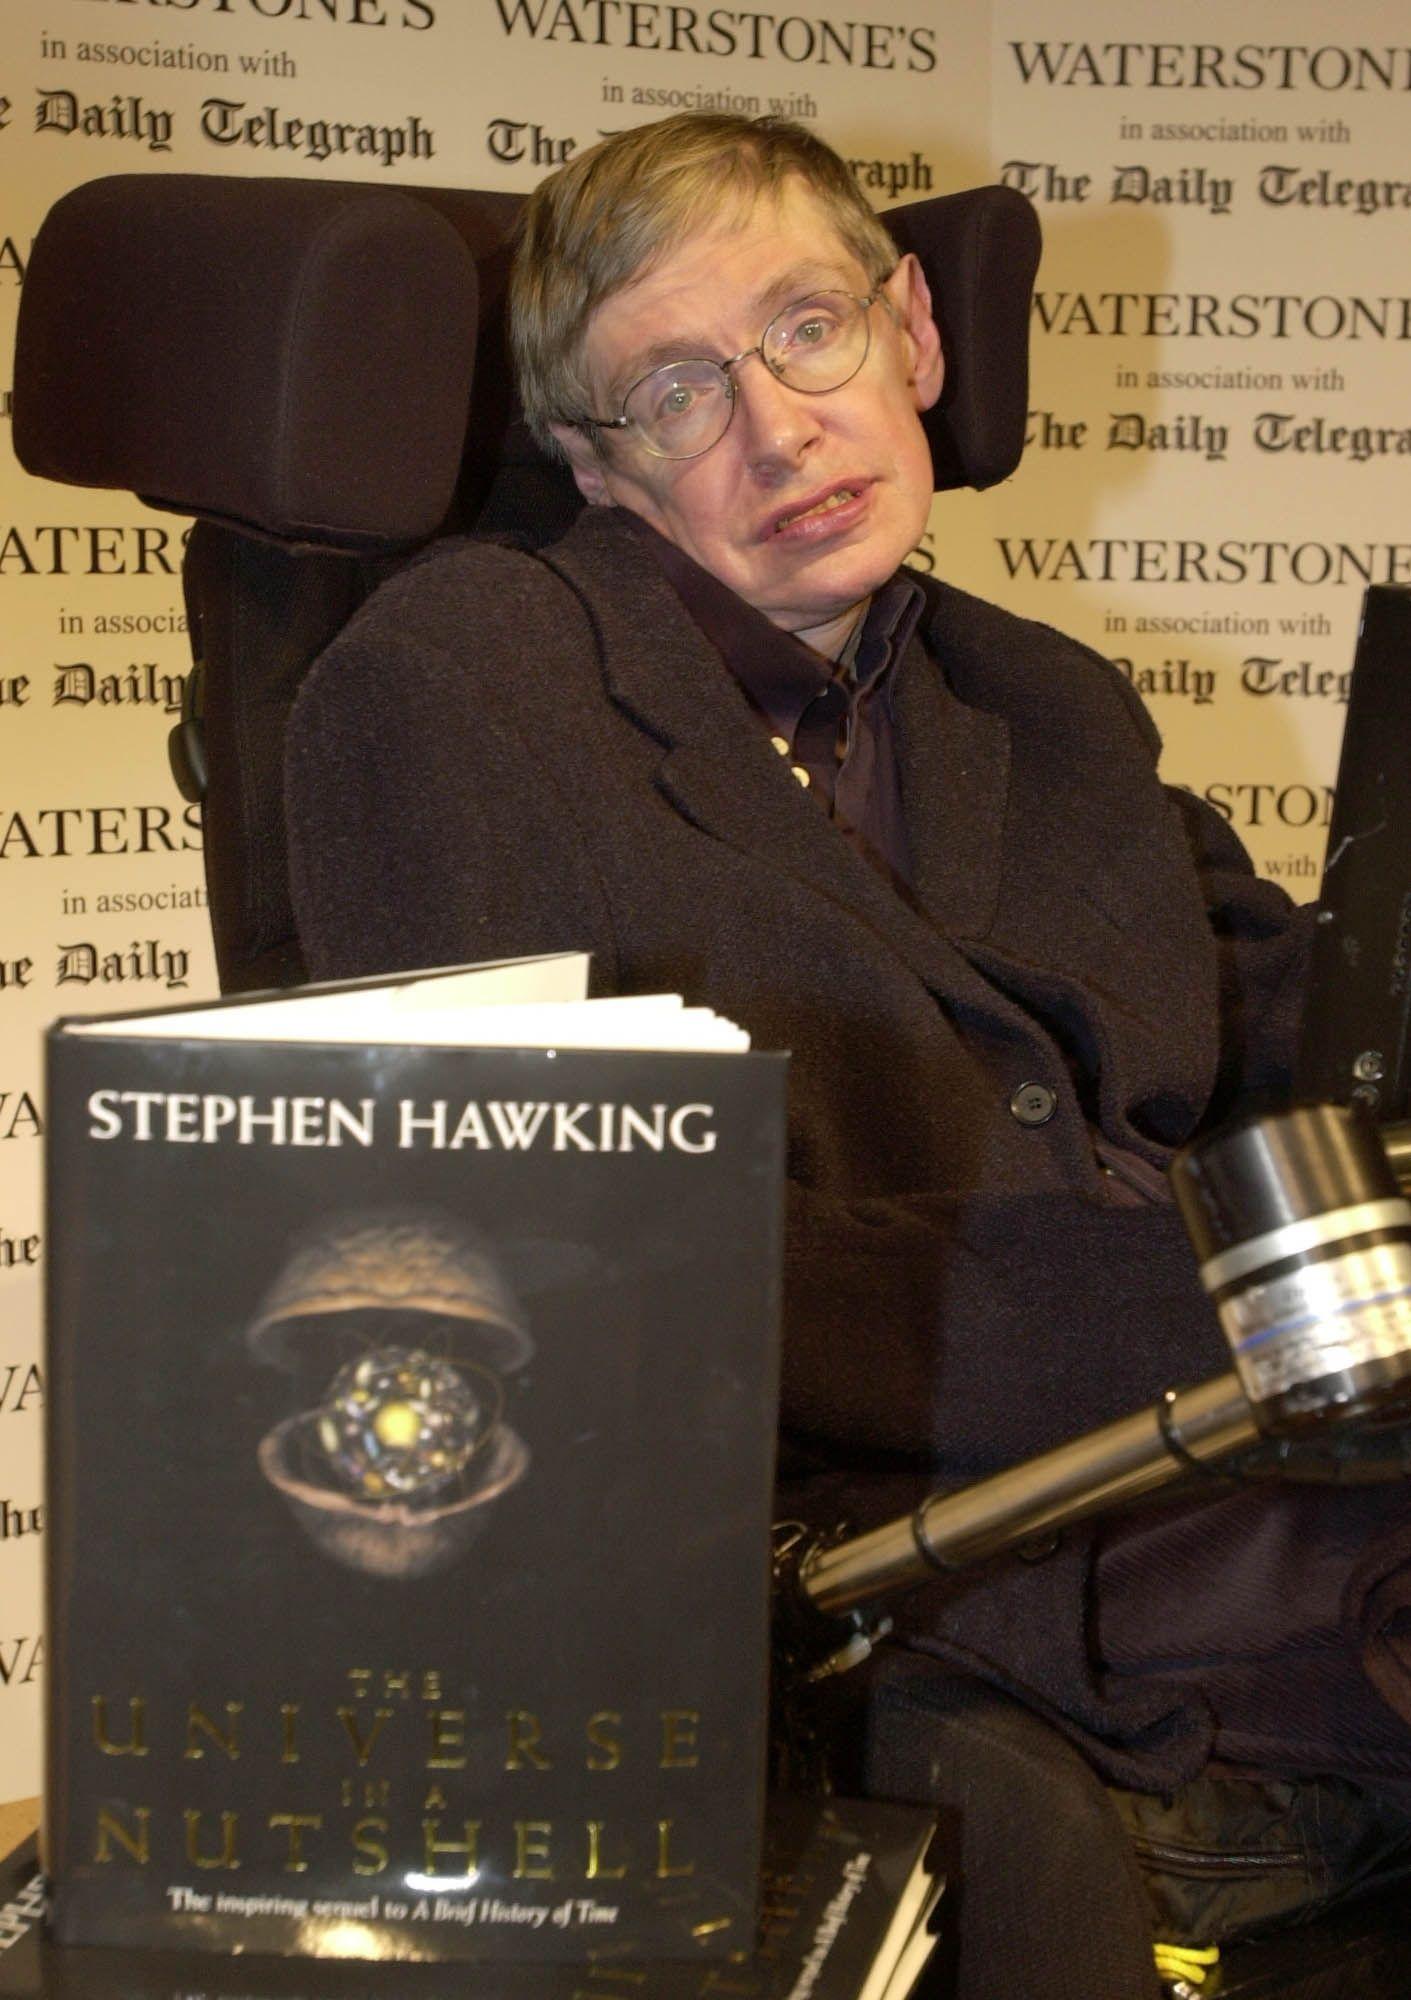 Stephen Hawking Famed Physicist Dies at 76  National Geographic